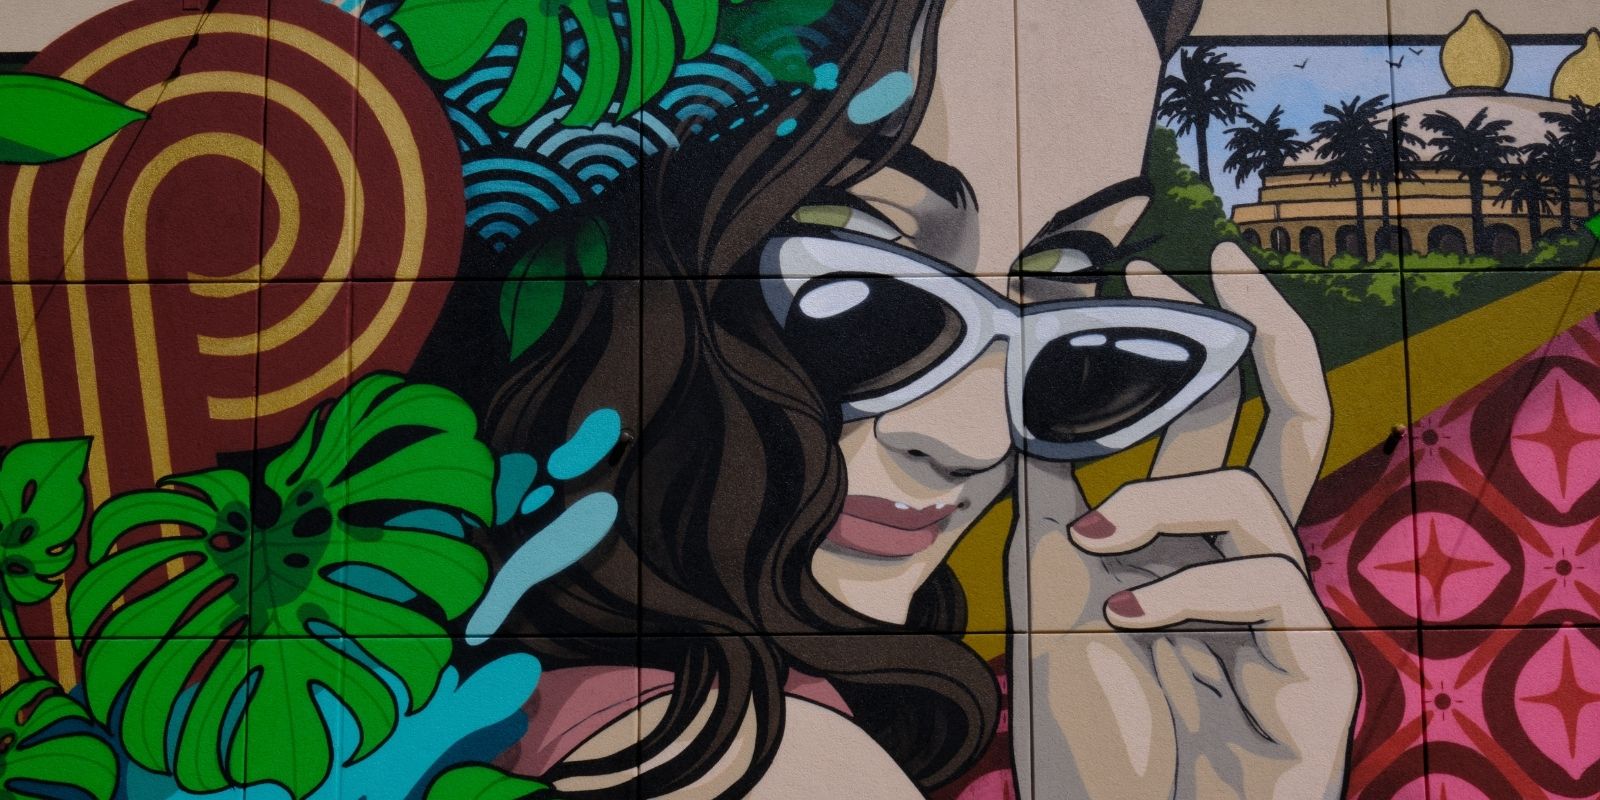 Mural art at the Retro Pool in SAHARA. Includes a woman peeking out above her sunglasses, leaves and the infinity S